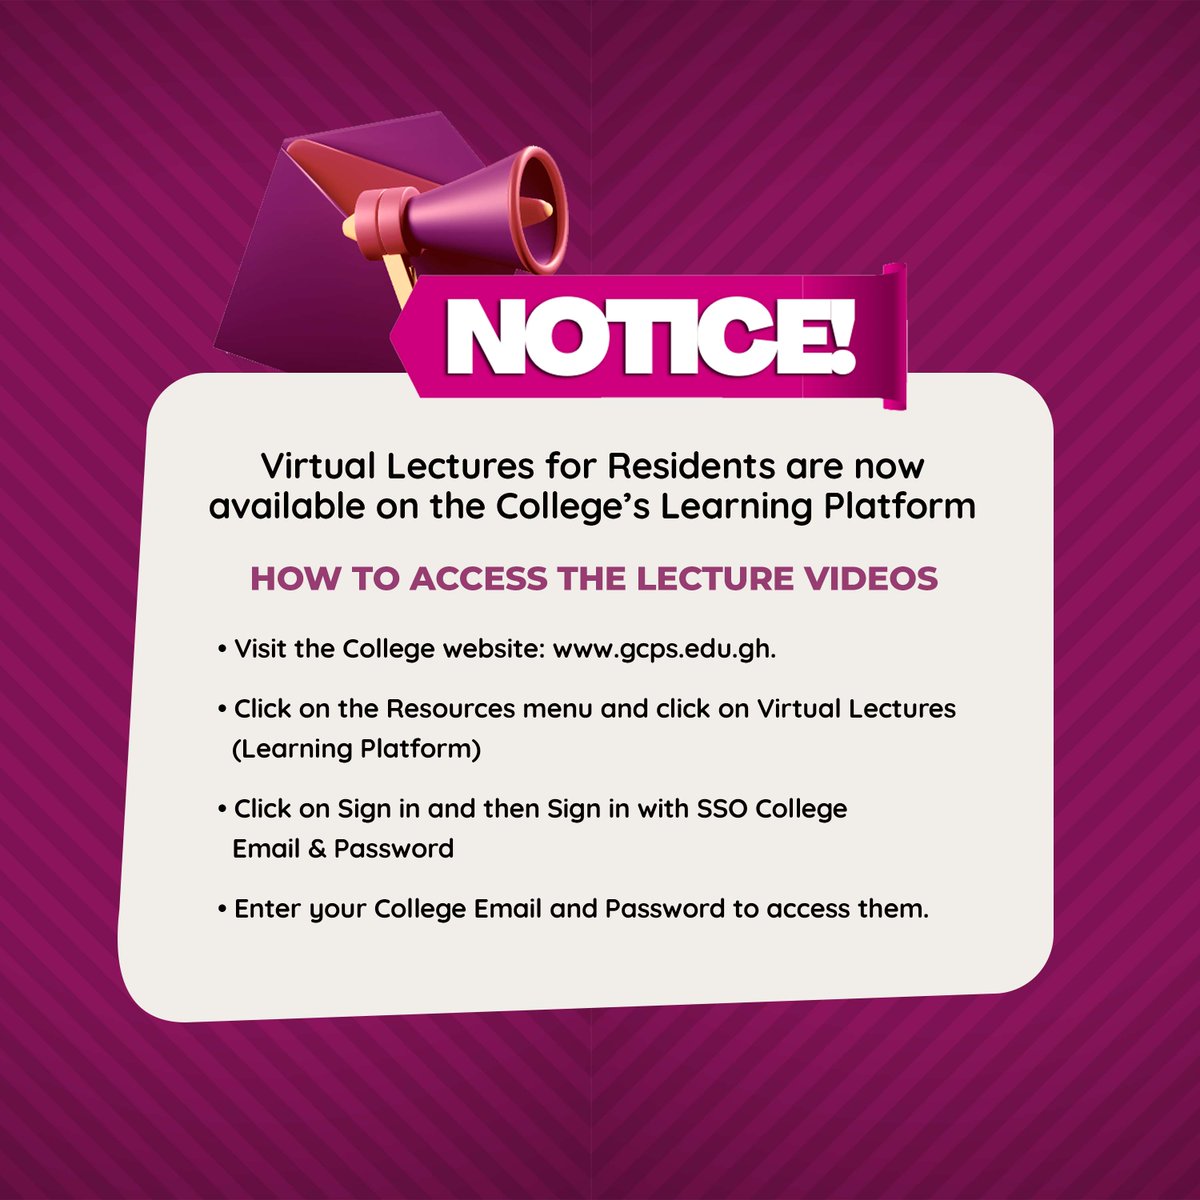 Virtual lectures for Residents are now available on the College Learning Platform. Visit gcps.edu.gh and follow the steps provided to access them.